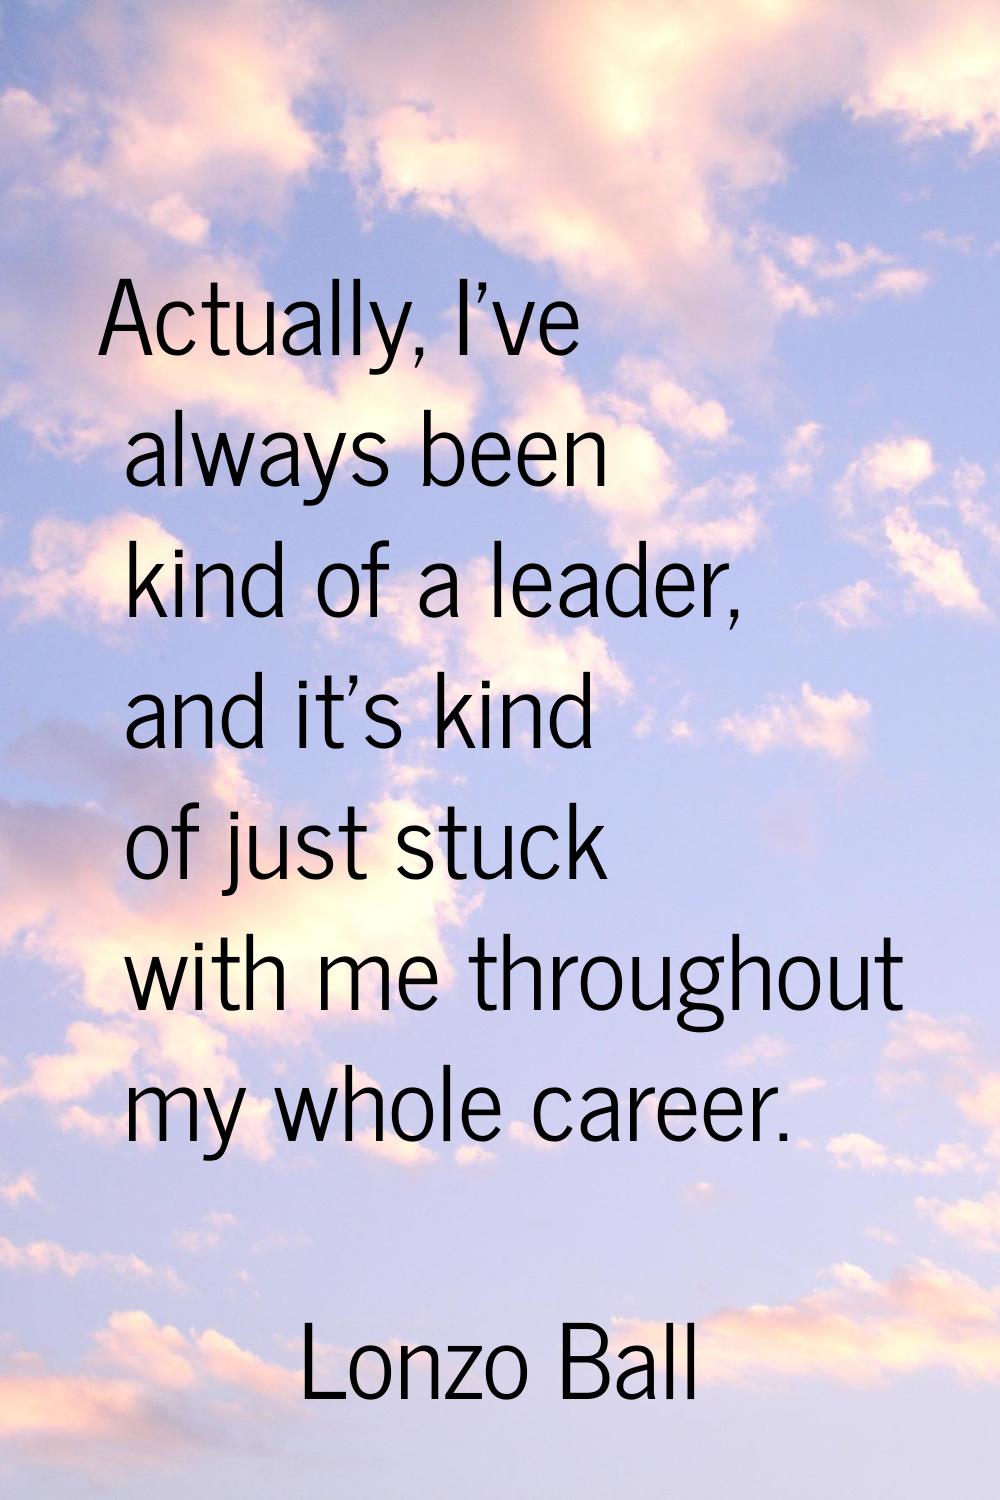 Actually, I've always been kind of a leader, and it's kind of just stuck with me throughout my whol